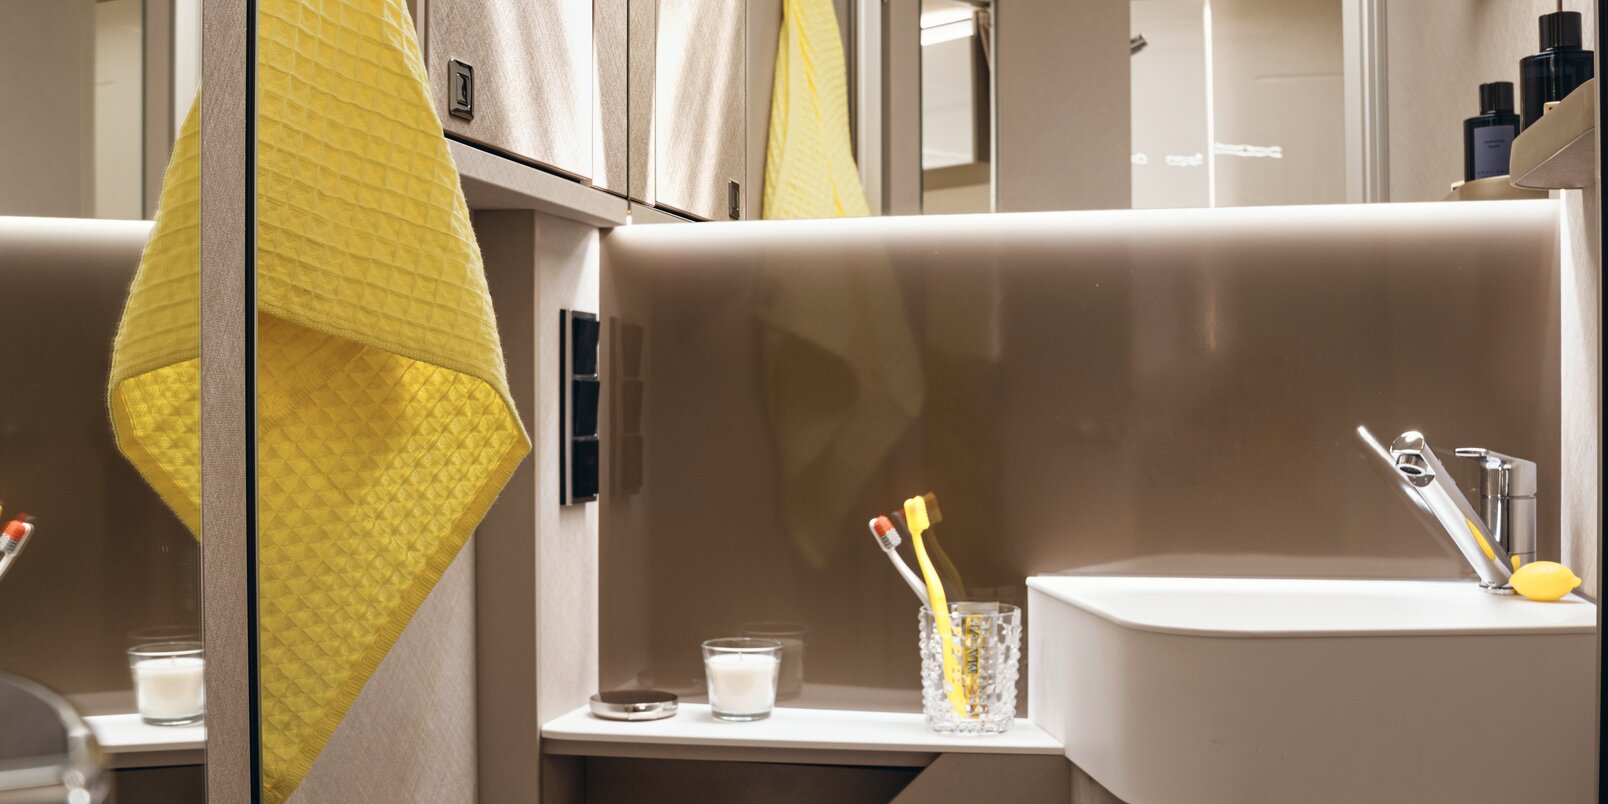 Mirror, wash basin, storage space, yellow towel and toilet in the bathroom of the HYMER Tramp S motorhome